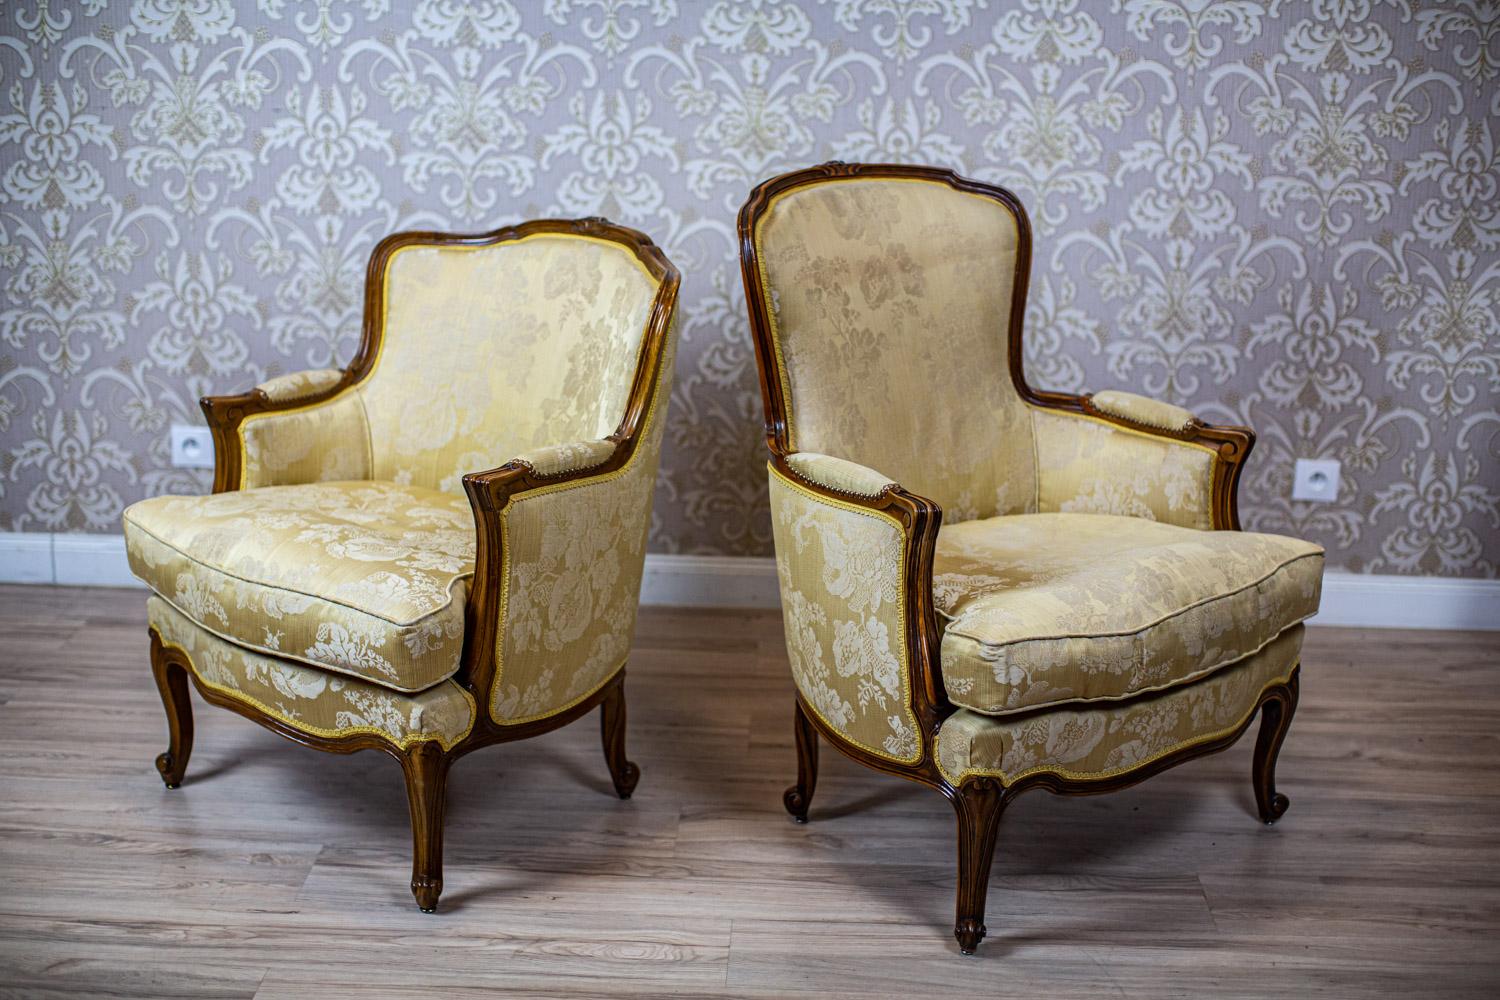 Pair of Stylized Walnut Armchairs From the 1930s in Floral Upholstery

We present you this pair of Louis armchairs made of walnut wood.
The seats are incredibly soft. The backrests and the armrests are upholstered.
Furthermore, the frame is covered